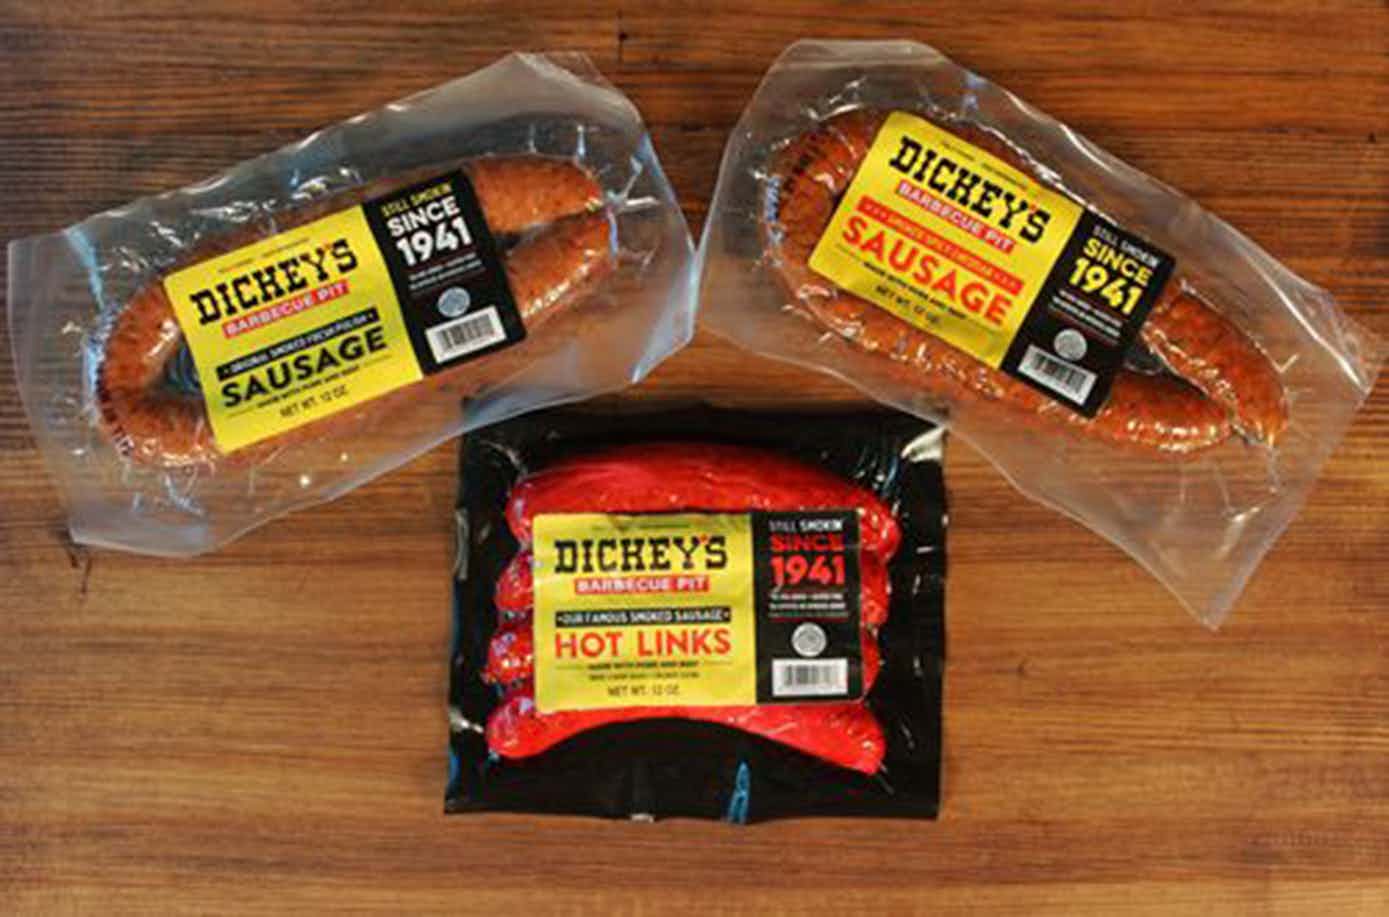 Meat + Poultry: Dickey's Sells Retail Sausage in Kroger